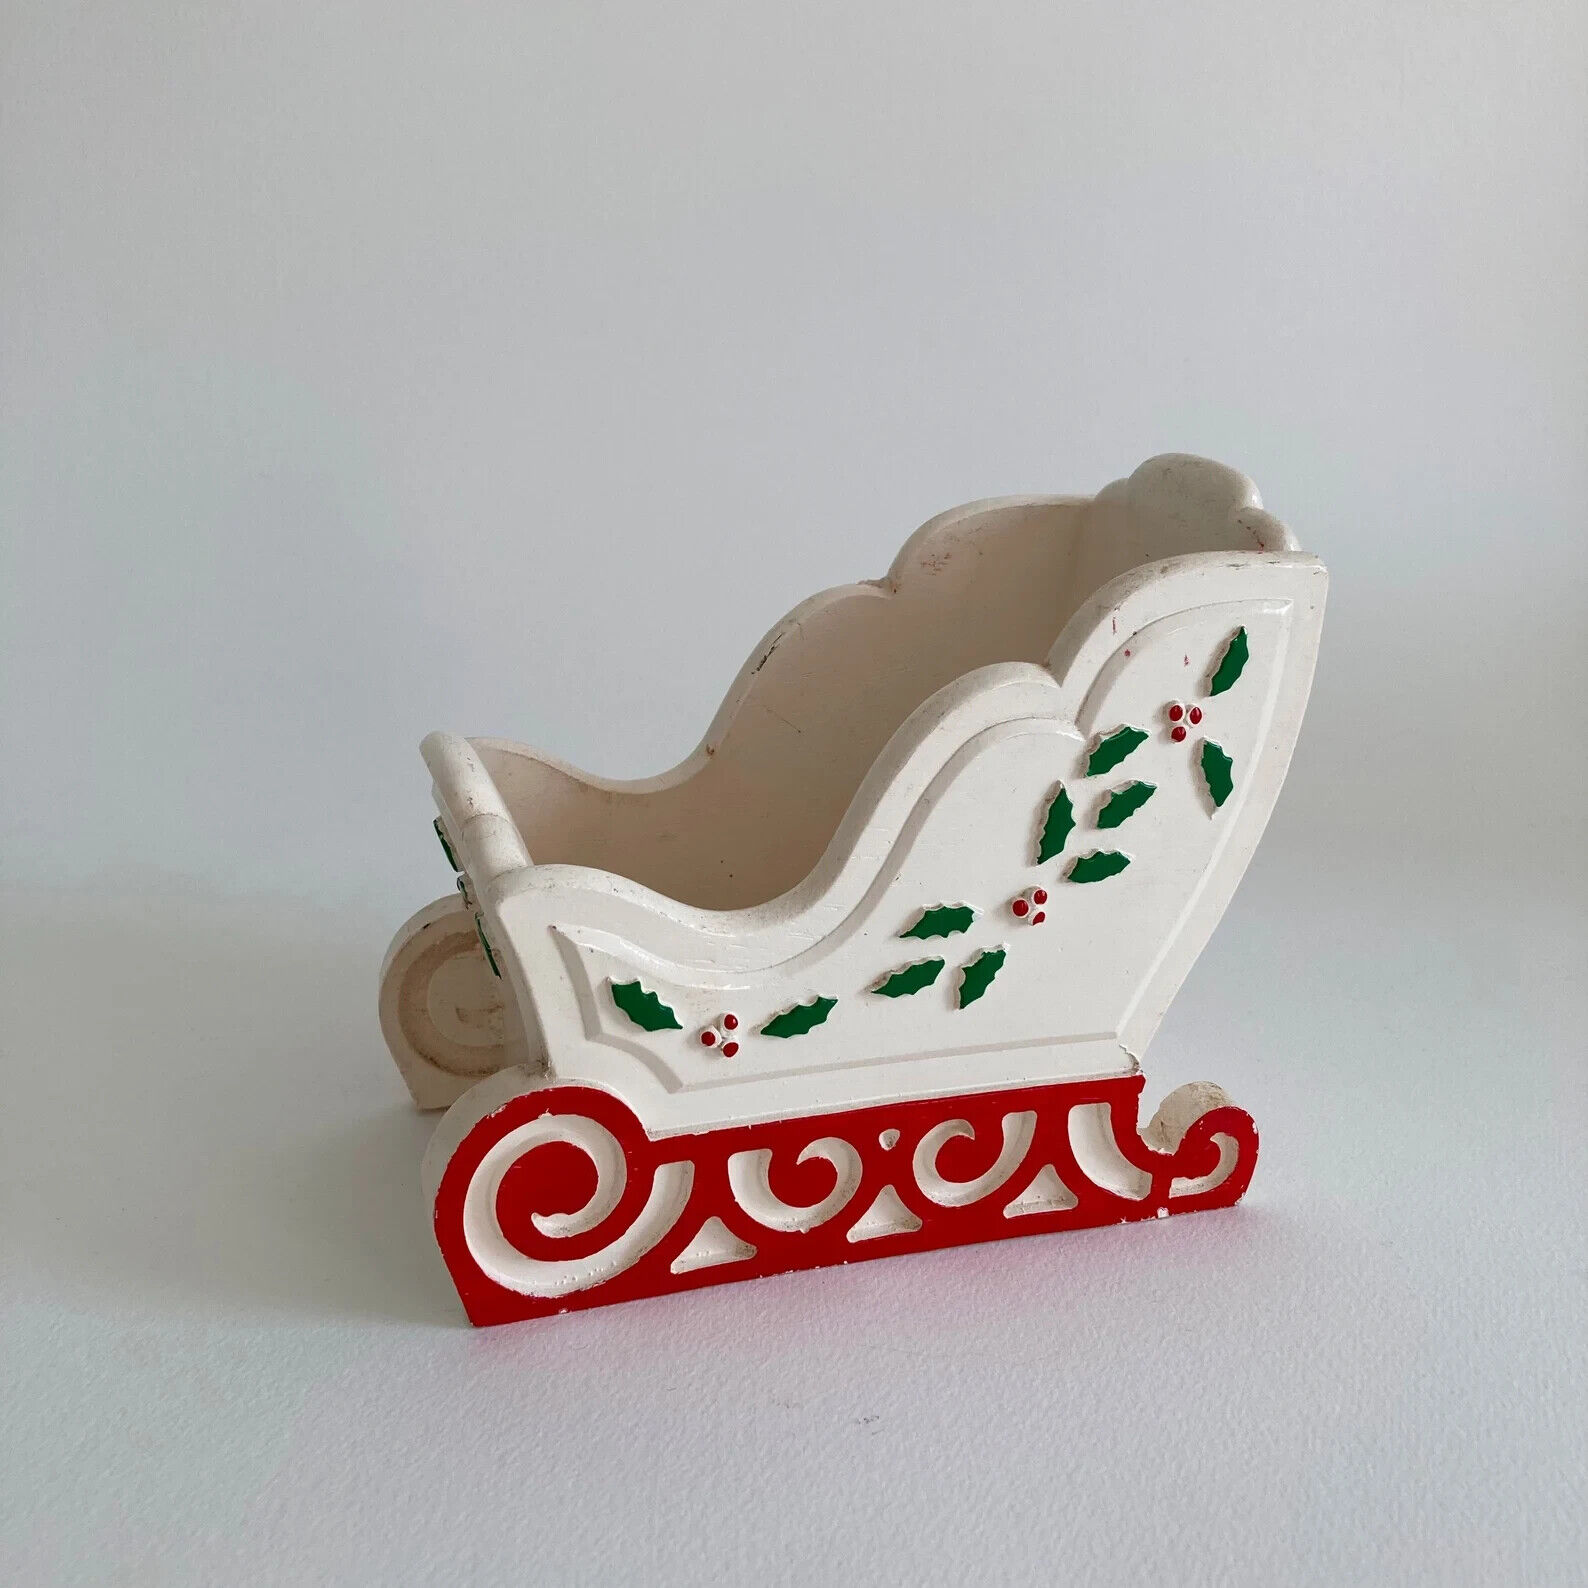 1990s, Christmas Sleigh Container – Holly and Ivy Pattern – Antique Paint Finish